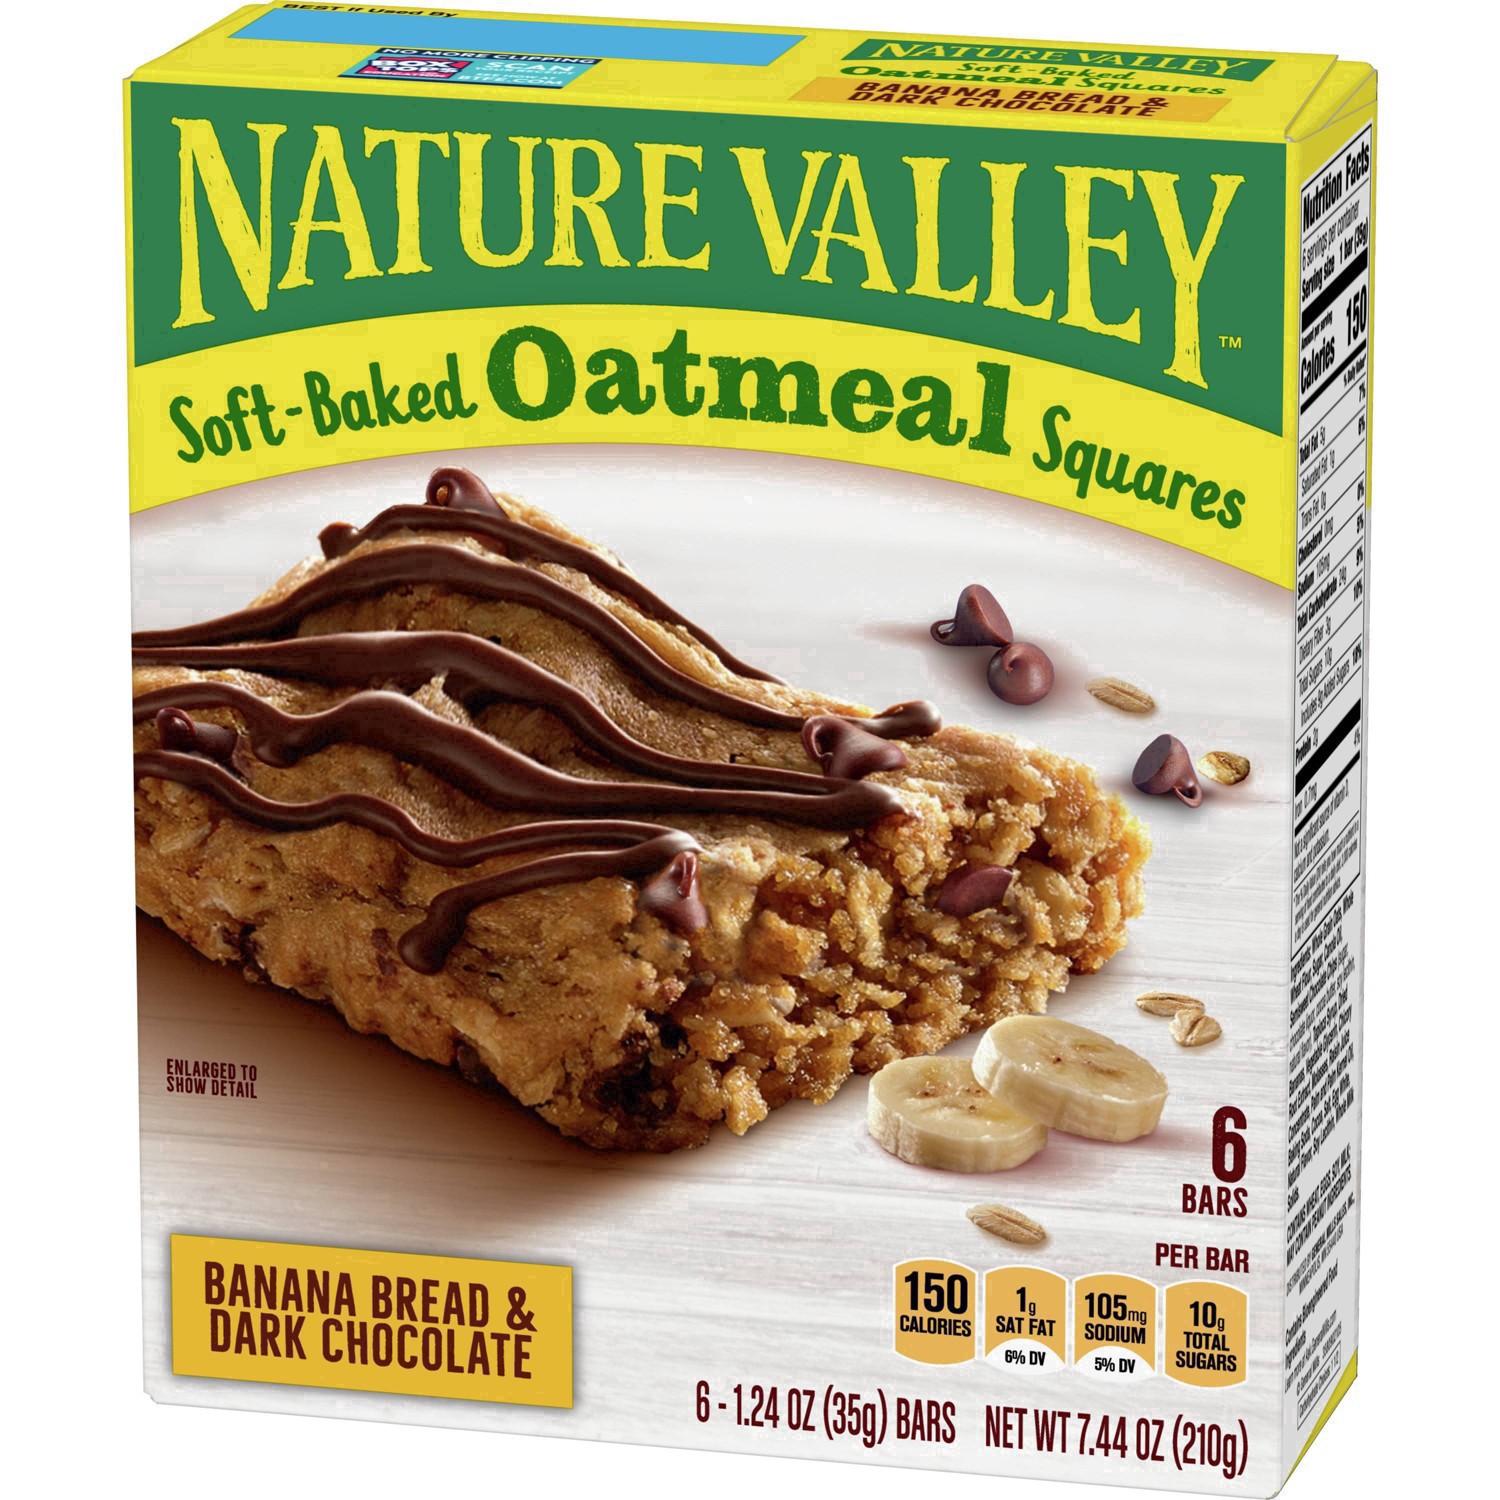 slide 76 of 101, Nature Valley Soft-Baked Oatmeal Squares, Banana Bread & Dark Chocolate, 6 ct, 6 ct